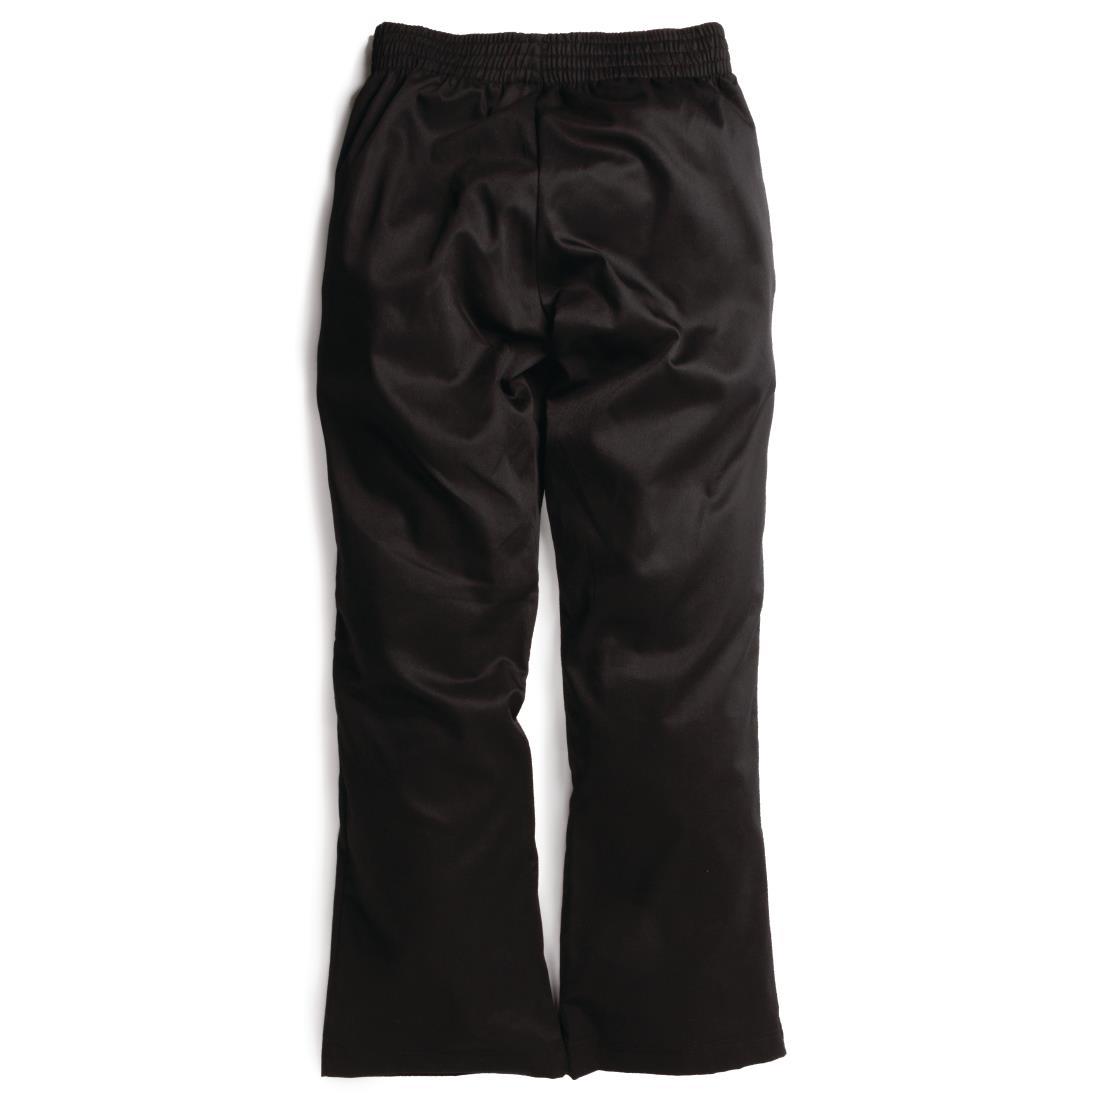 Chef Works Womens Basic Baggy Chefs Trousers Black S - B223-S  - 3